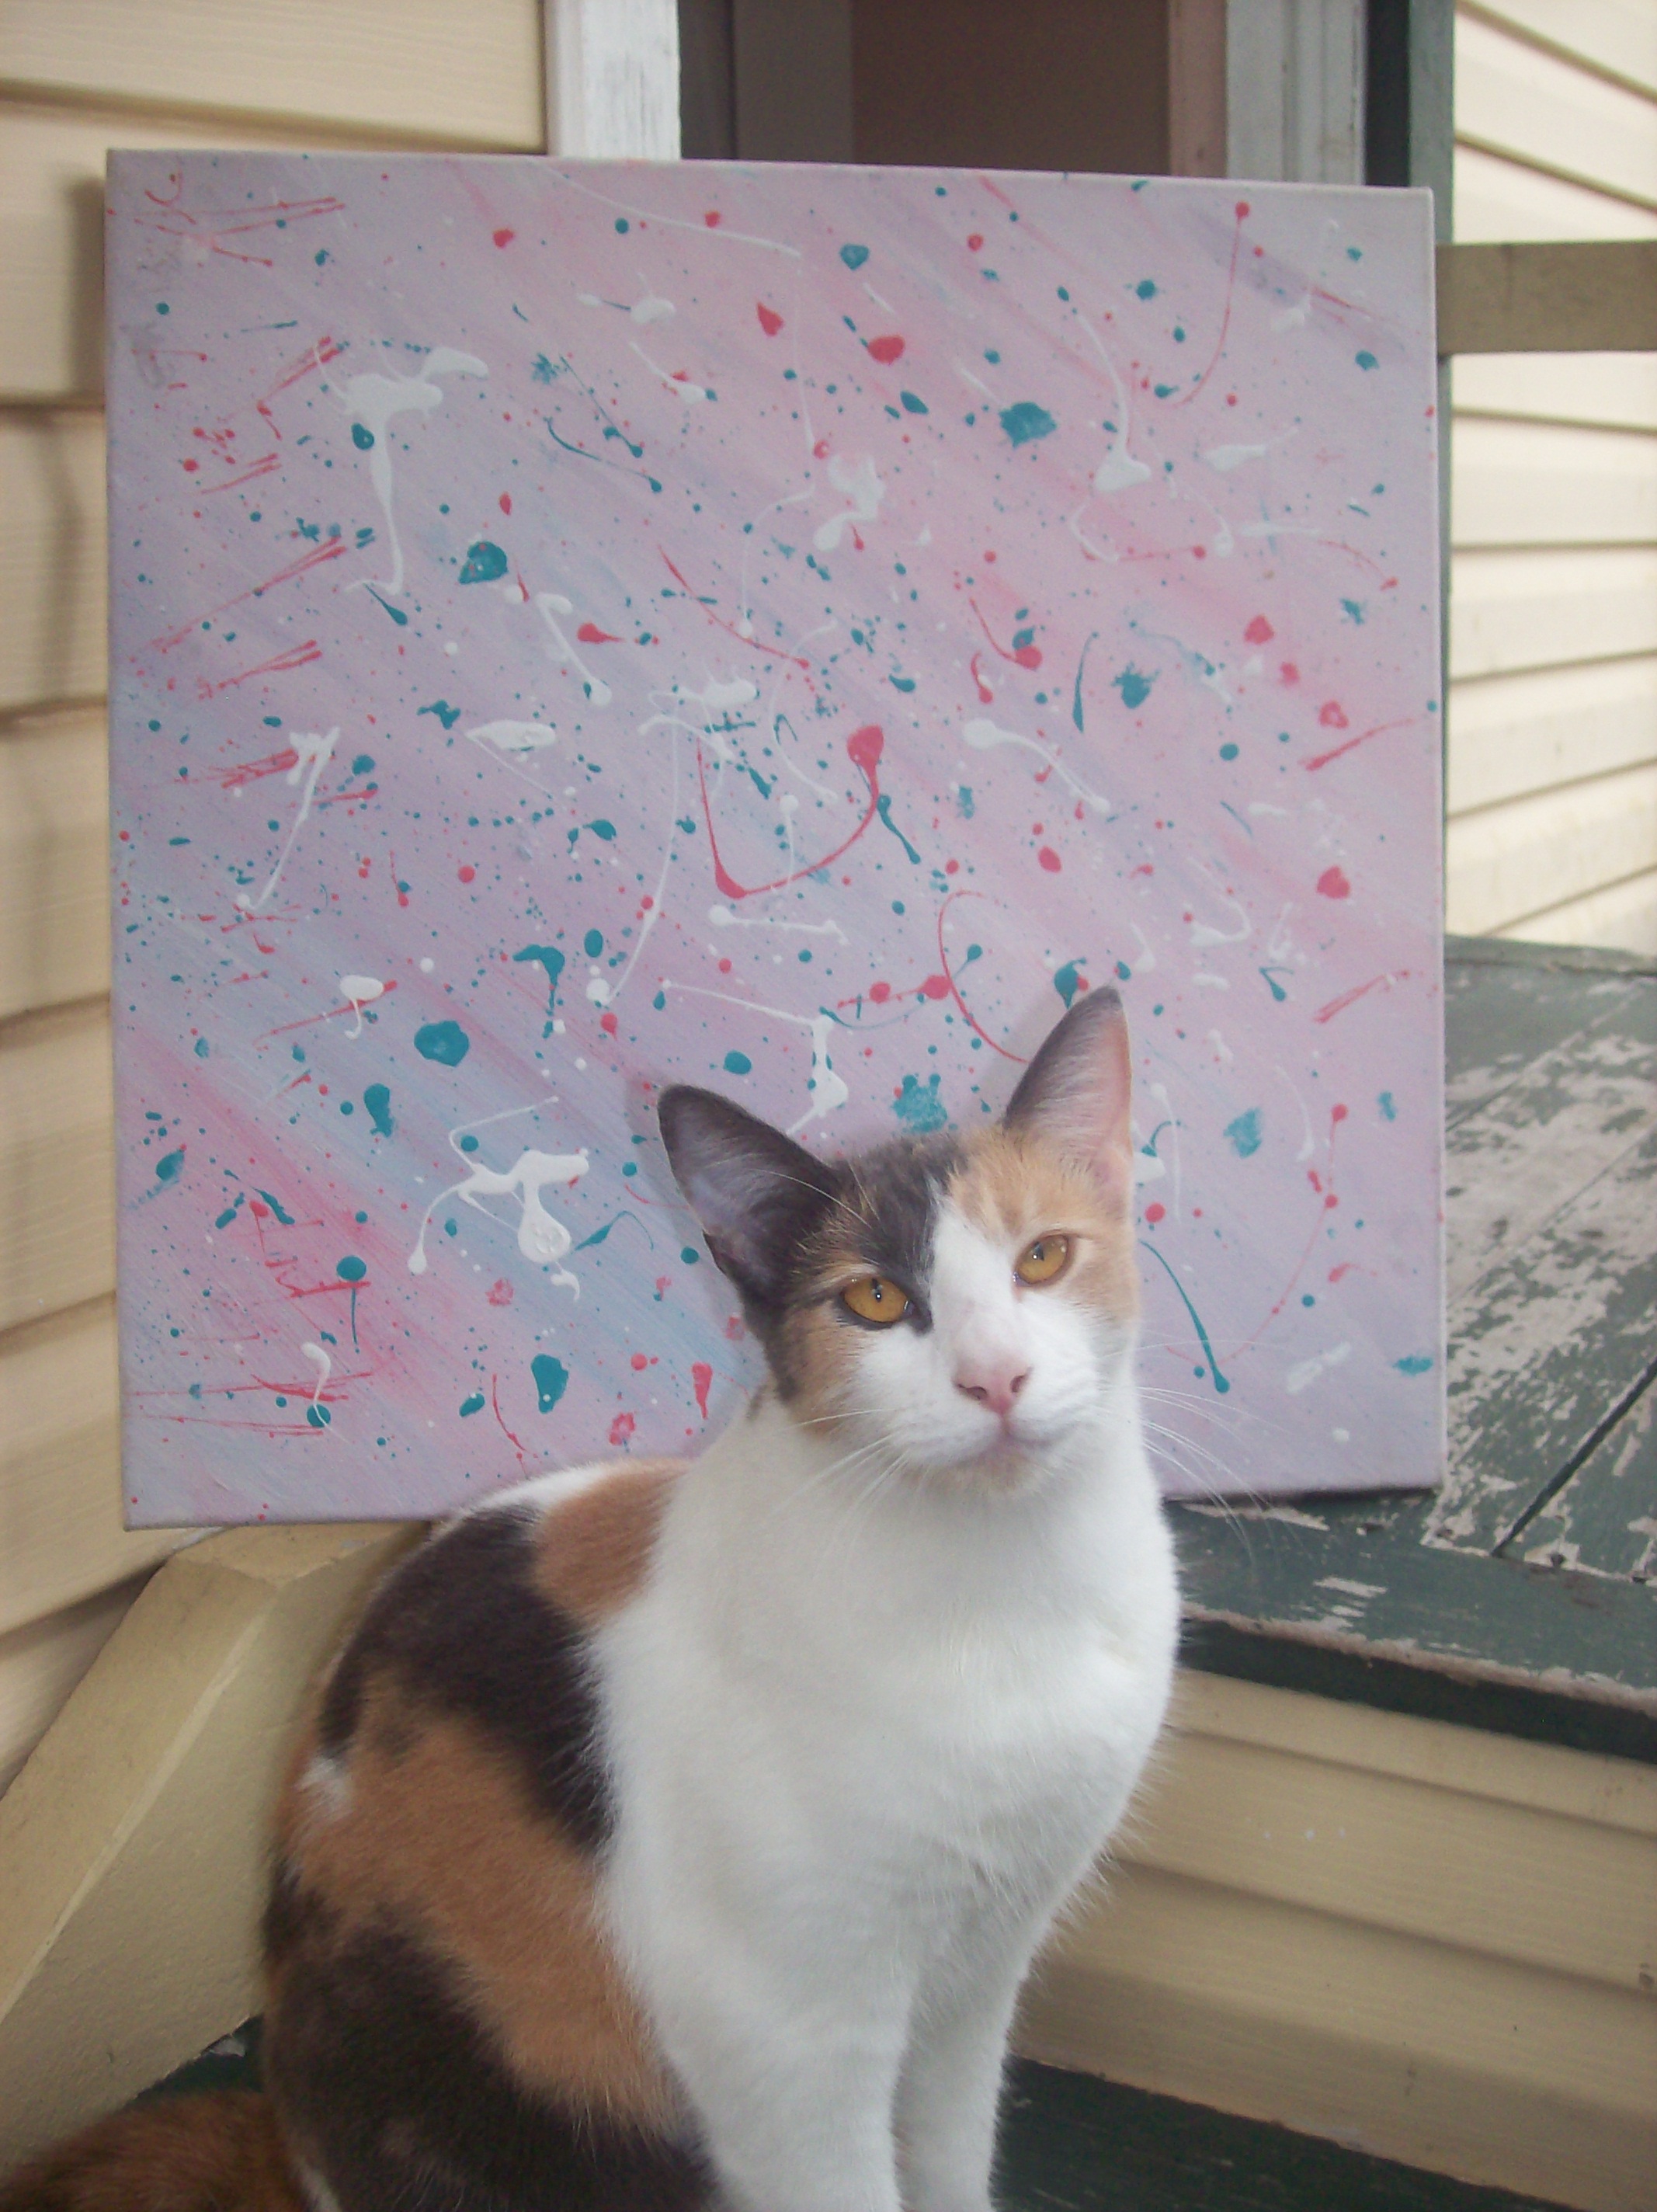 My Painting Is Behind The Cat, Or It Can Be A Photogaph Called  The Arty Cat